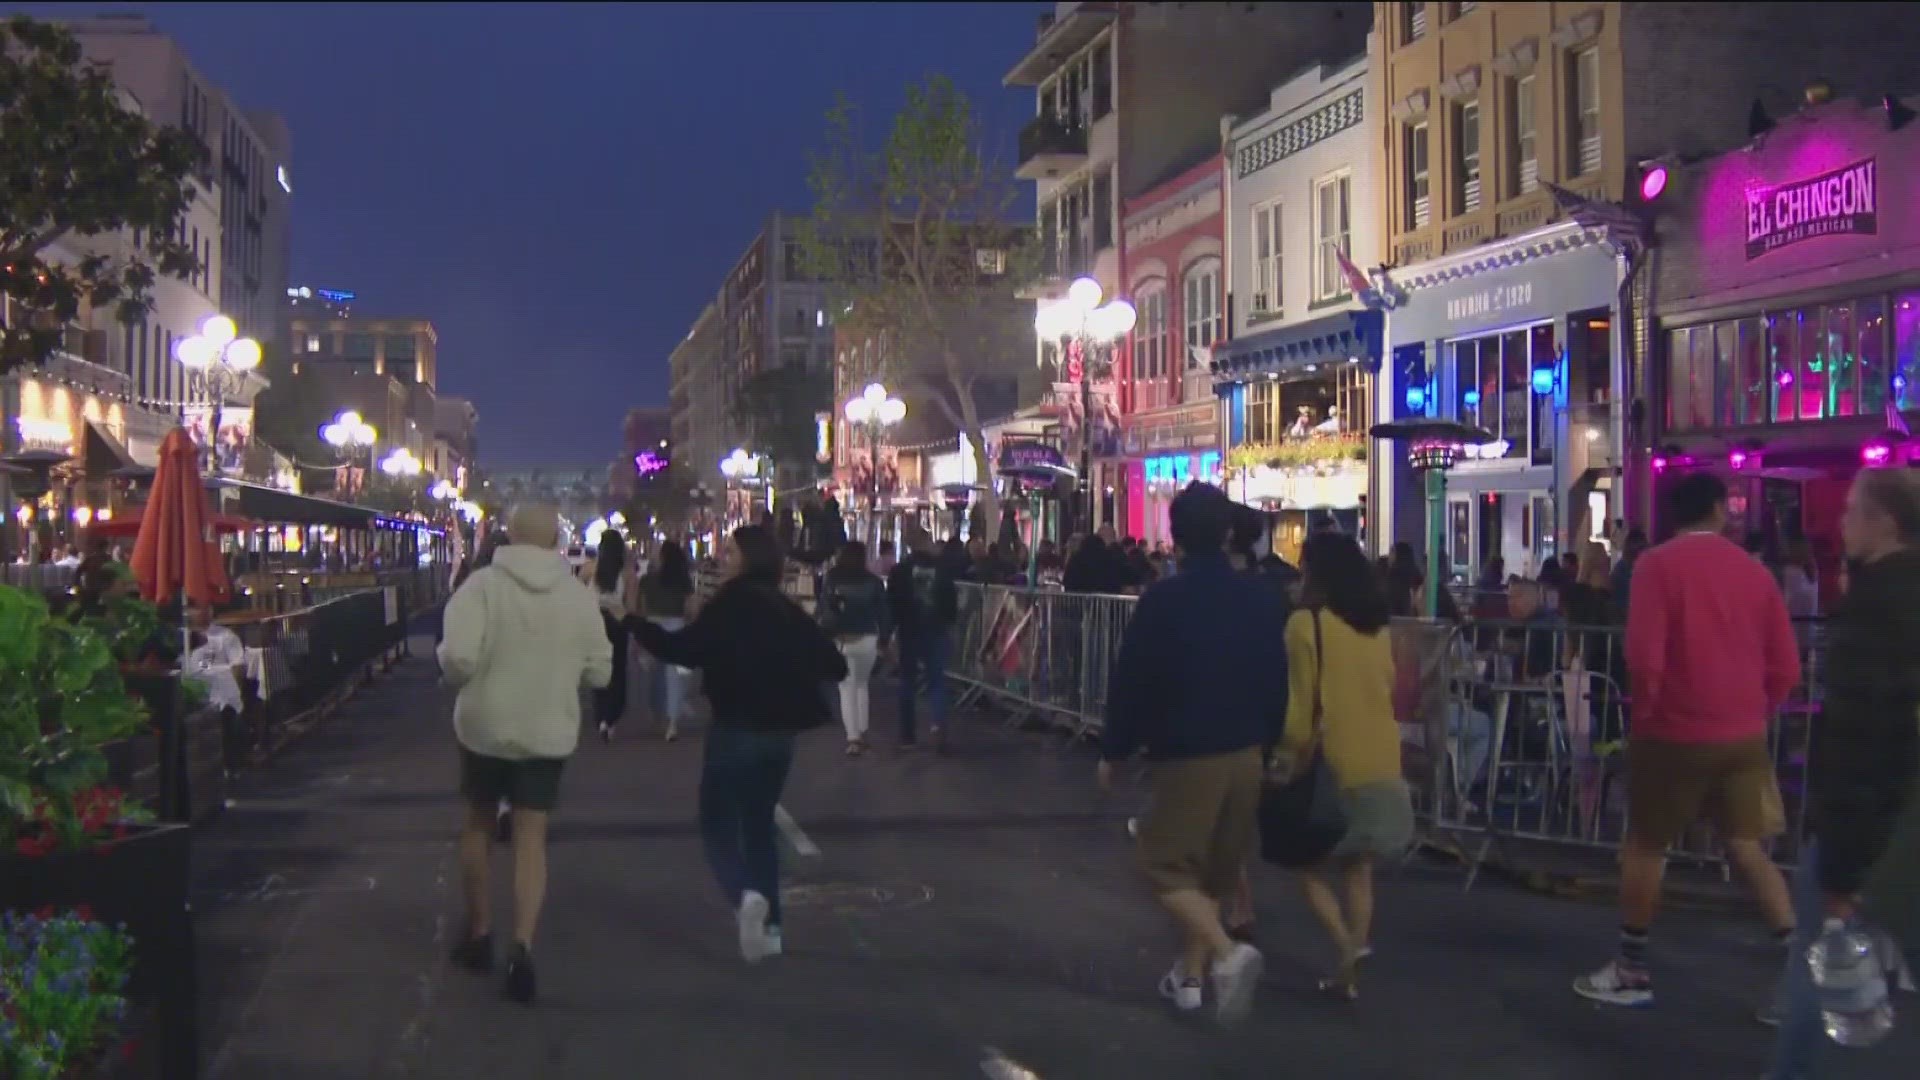 The city is expected to approve a plan this week to make the Gaslamp more pedestrian friendly.